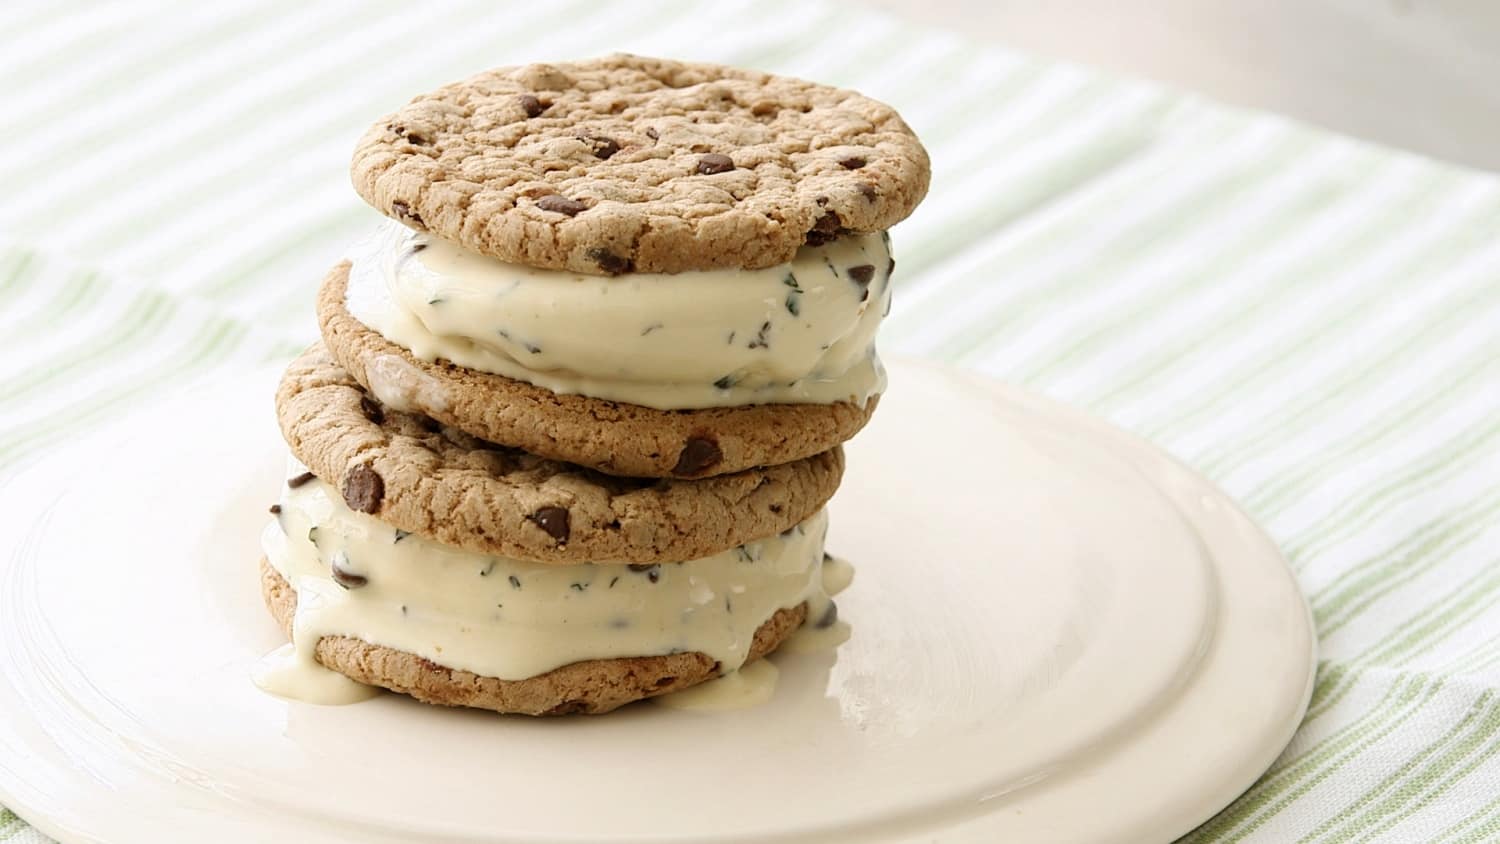 Chocolate chip and chocolate chip cookie ice cream sandwiches